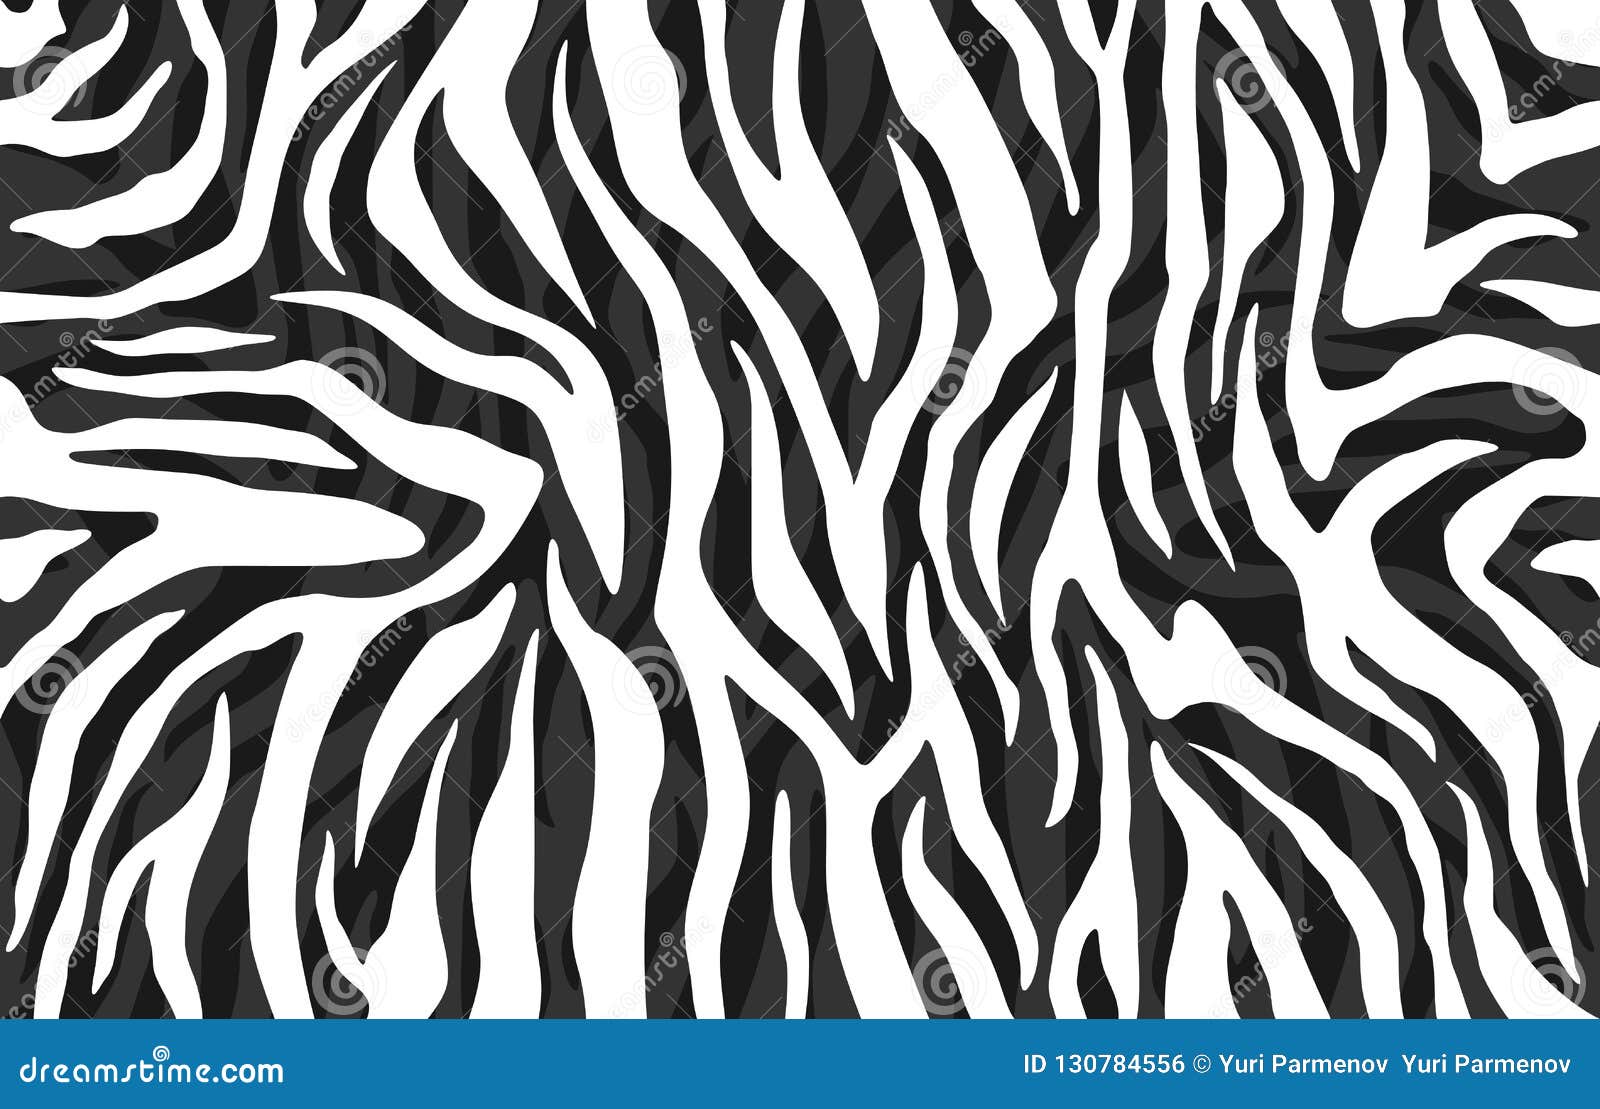 zebra skin, stripes pattern. animal print, black and white detailed and realistic texture.